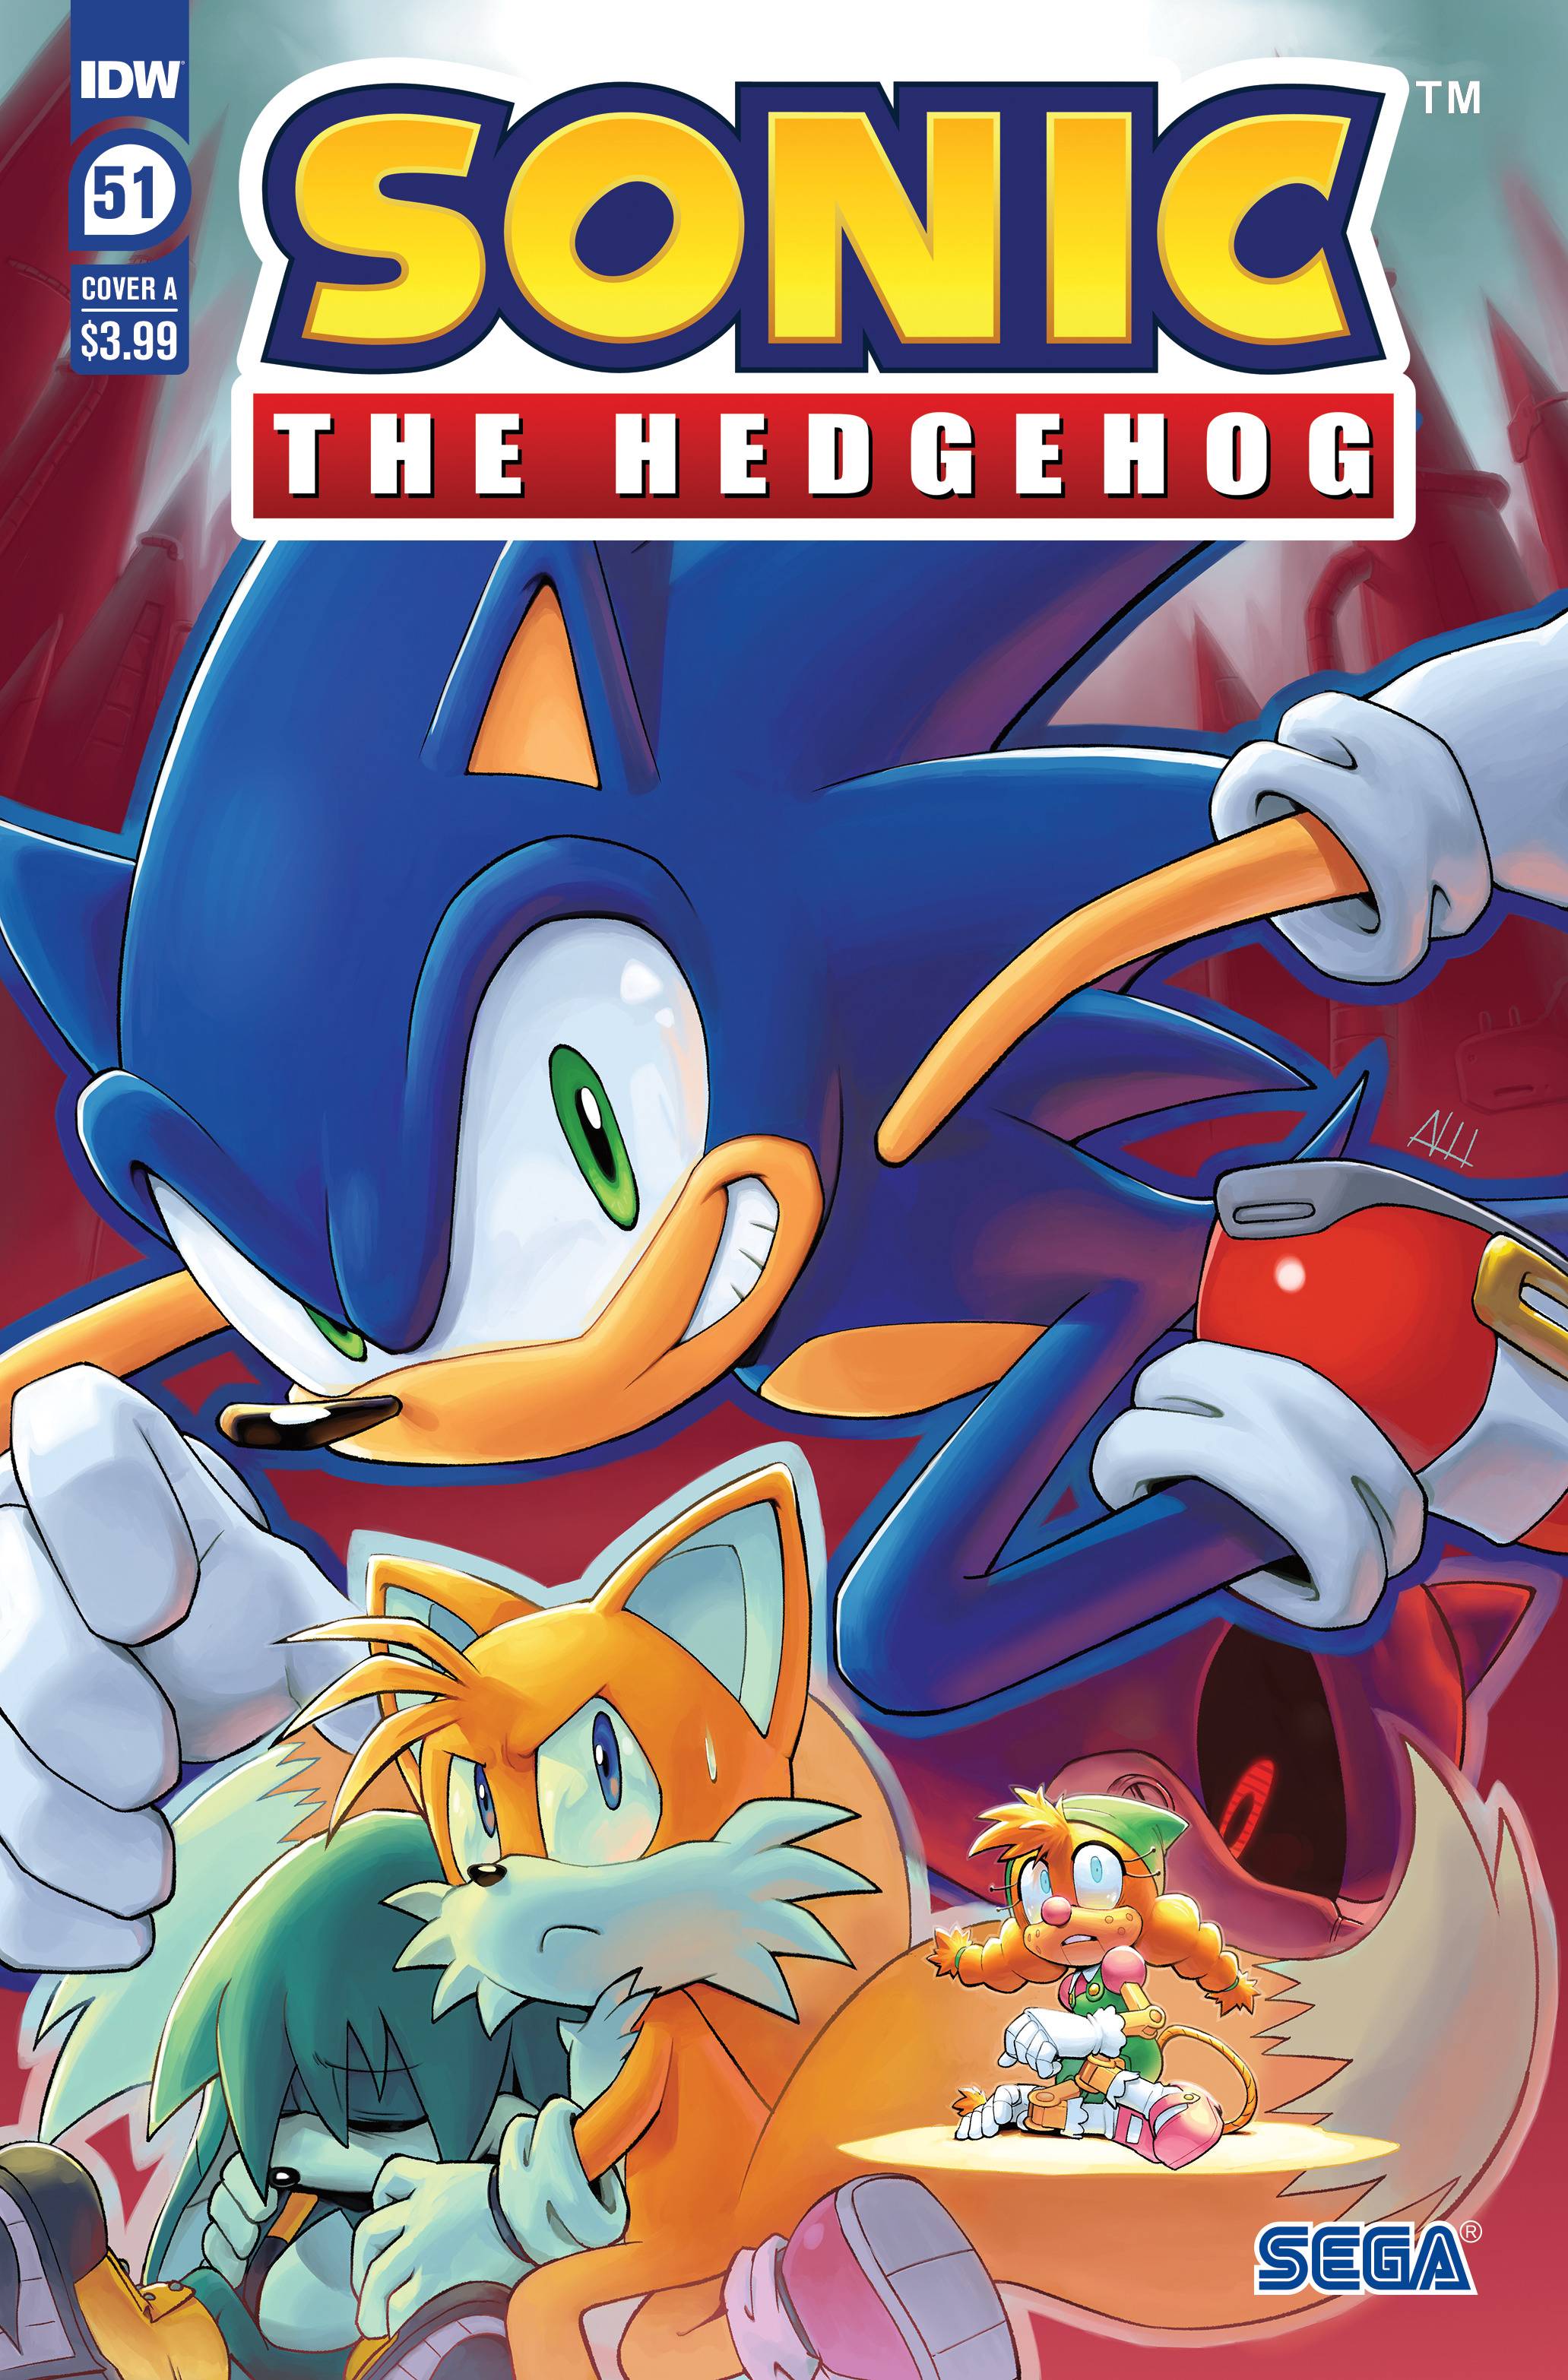 SONIC THE HEDGEHOG #31 VARIANT COVER B SEPTEMBER 2020 IDW COMICS